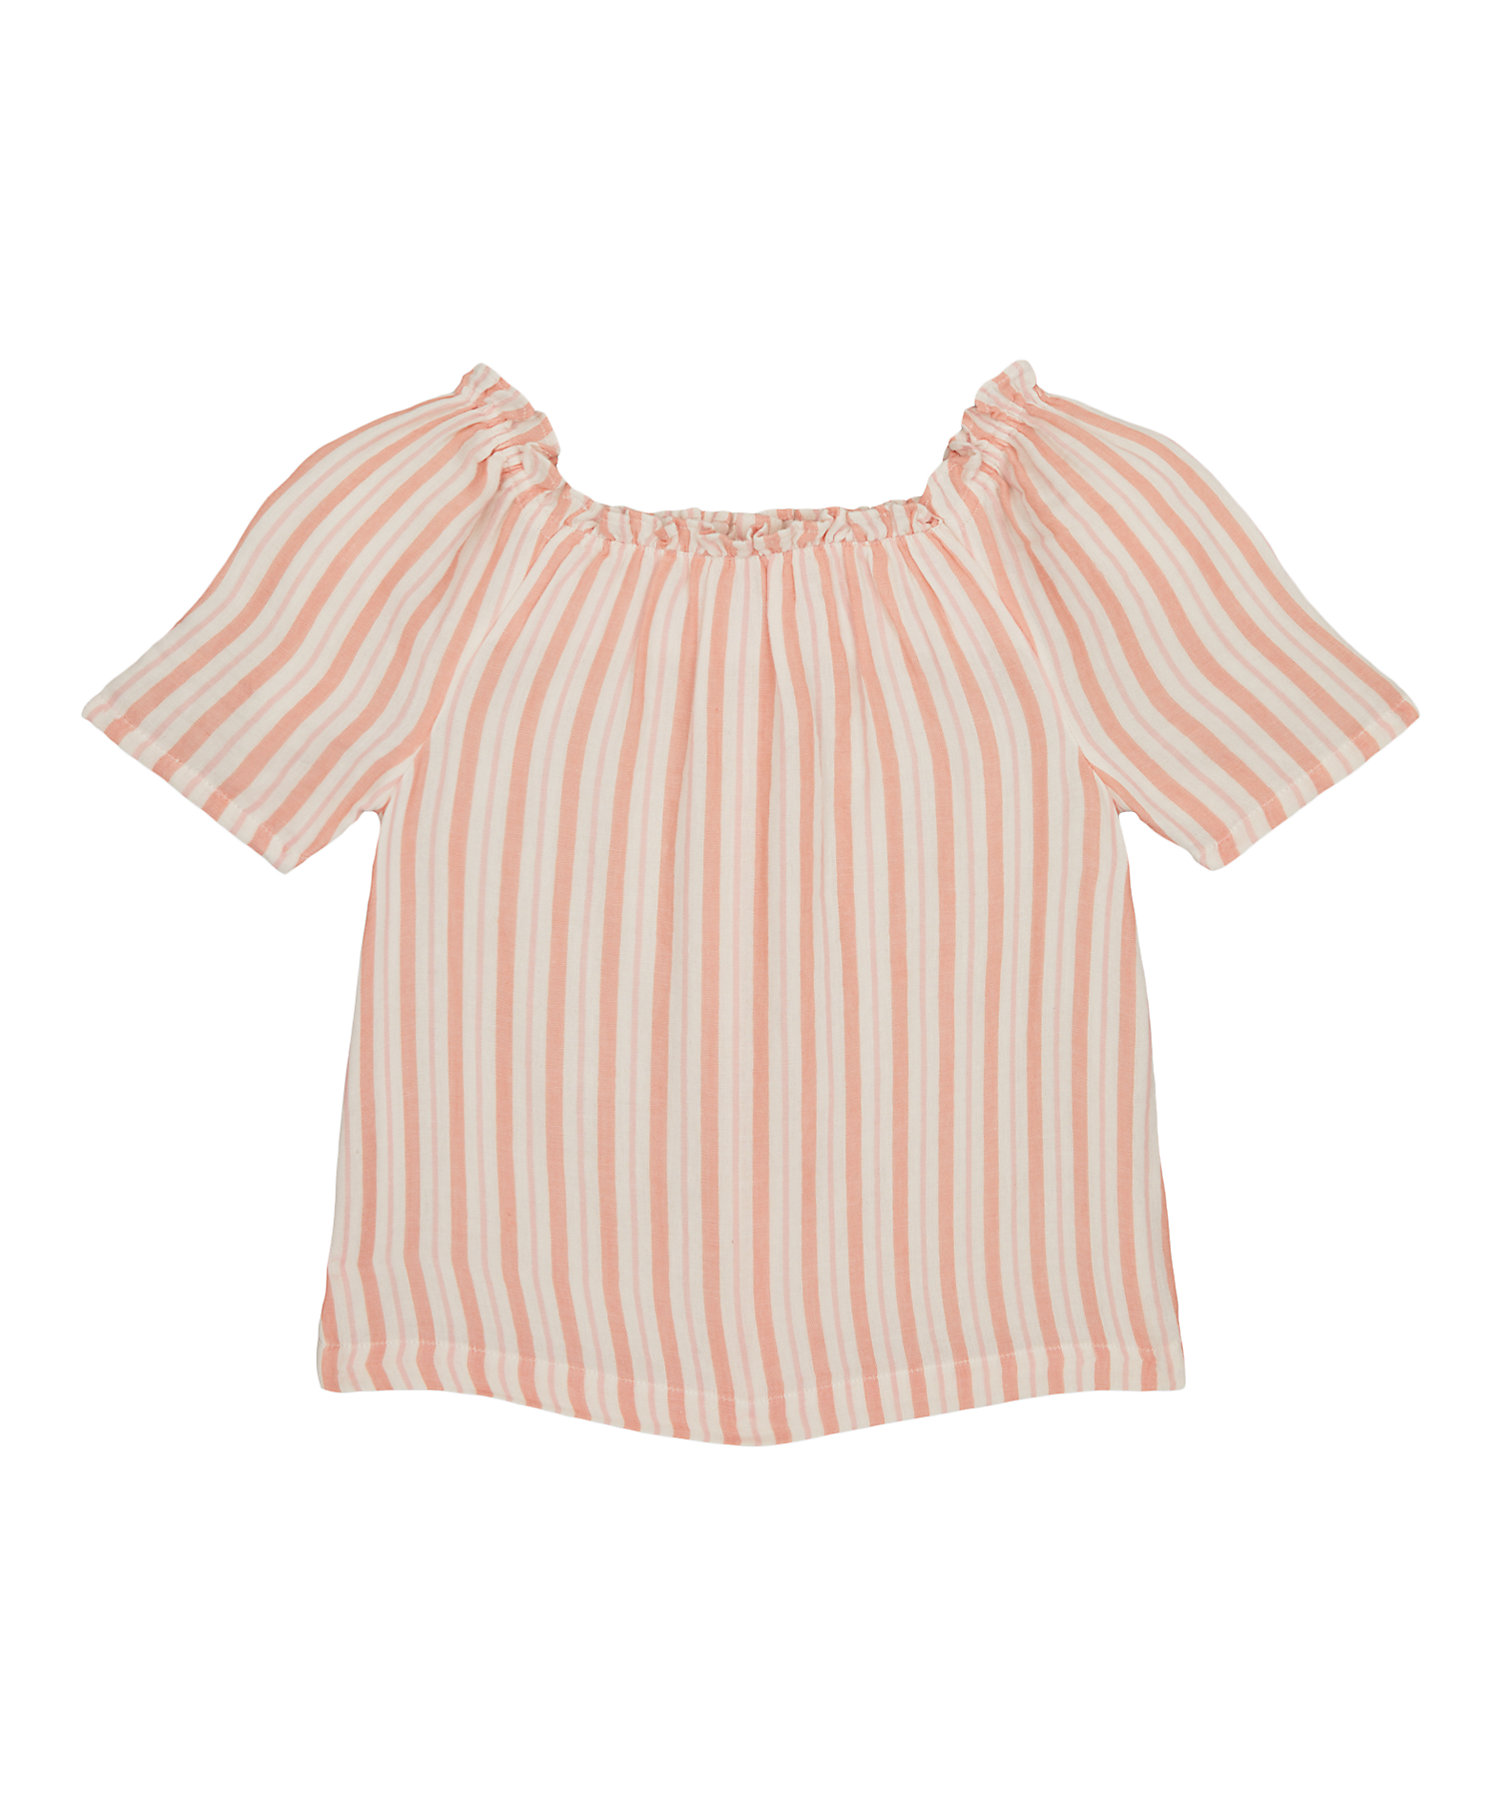 Mothercare Girls Striped Pink Top